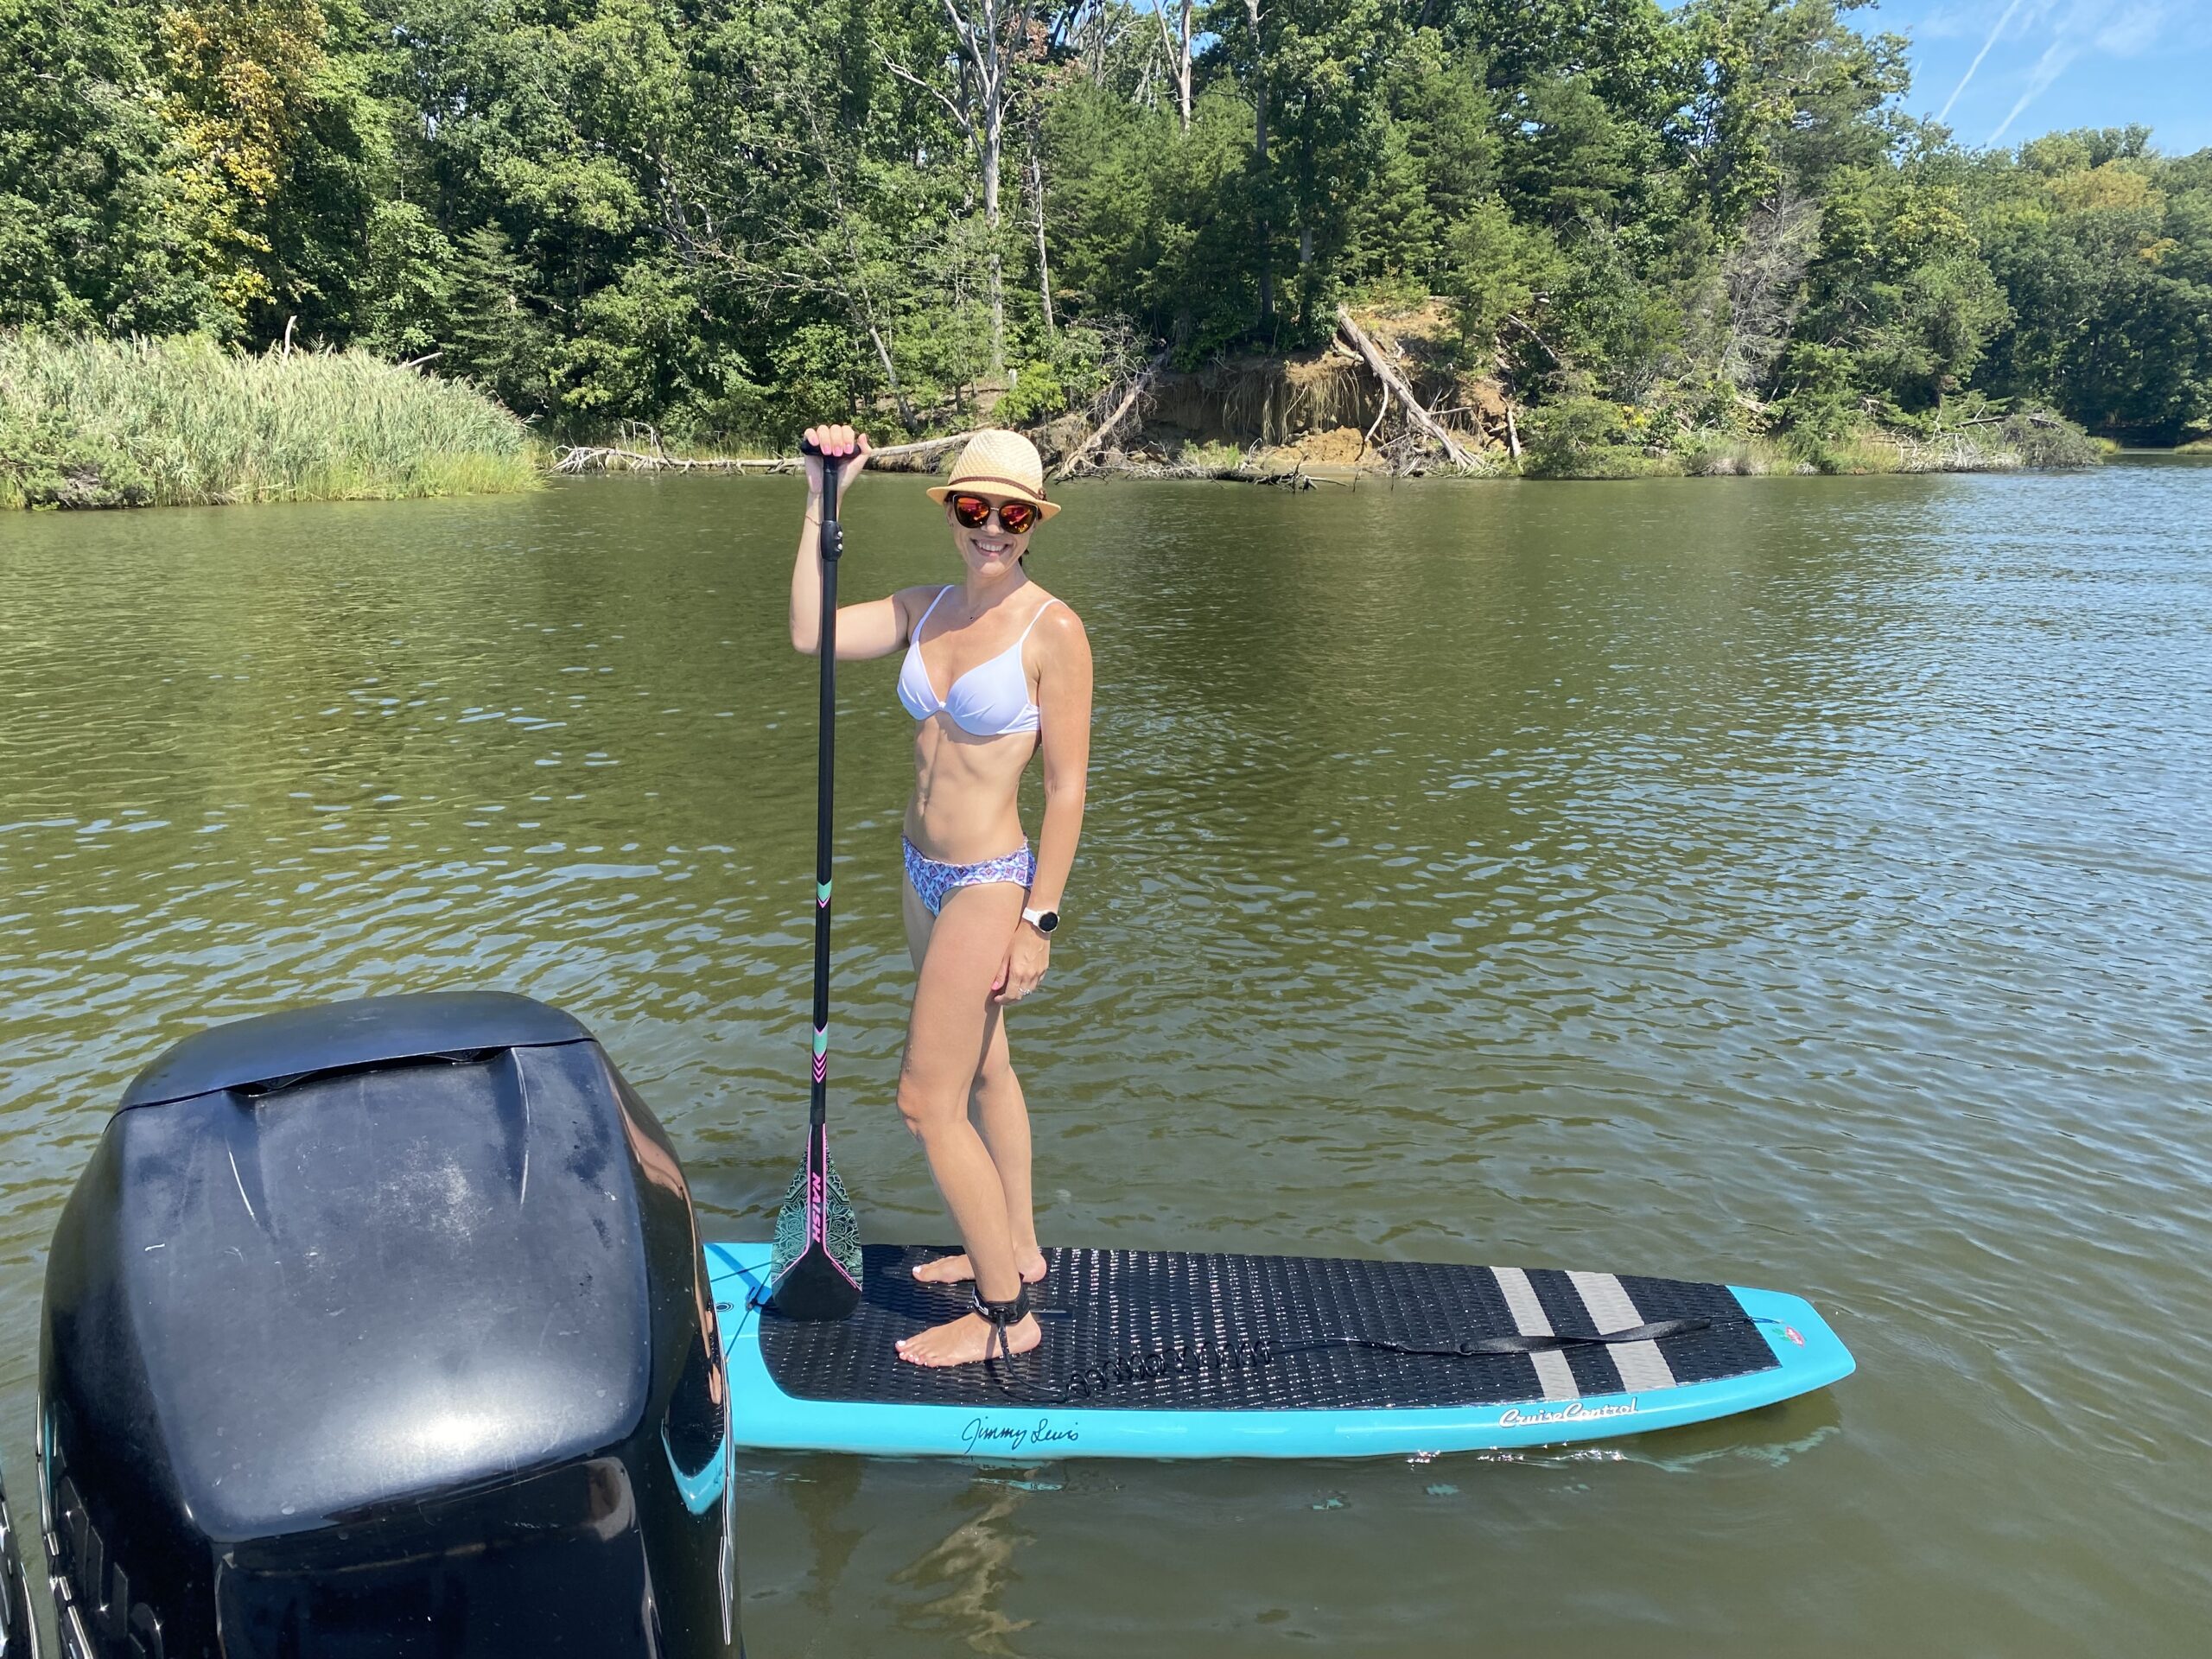 Stand-up Paddle Board